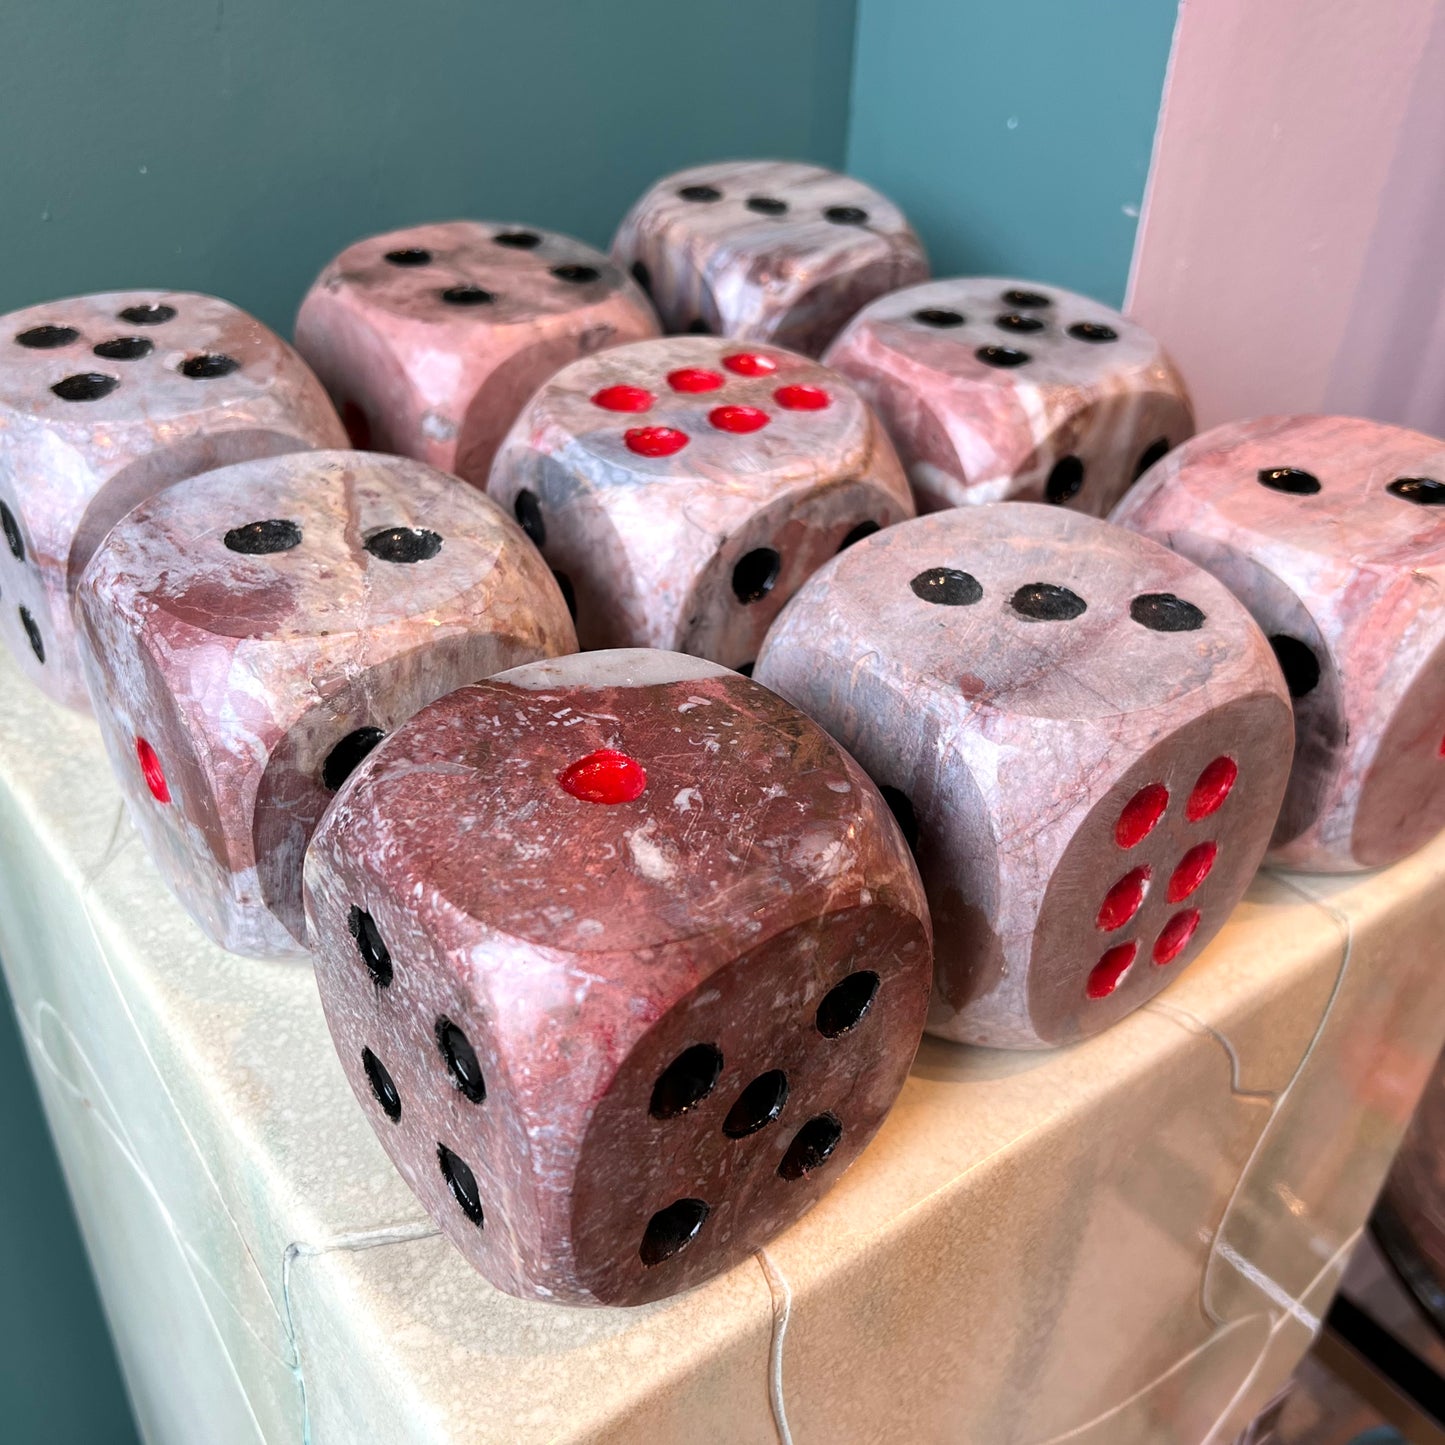 Pair of Large 3" Pink and Grey Marble Dice